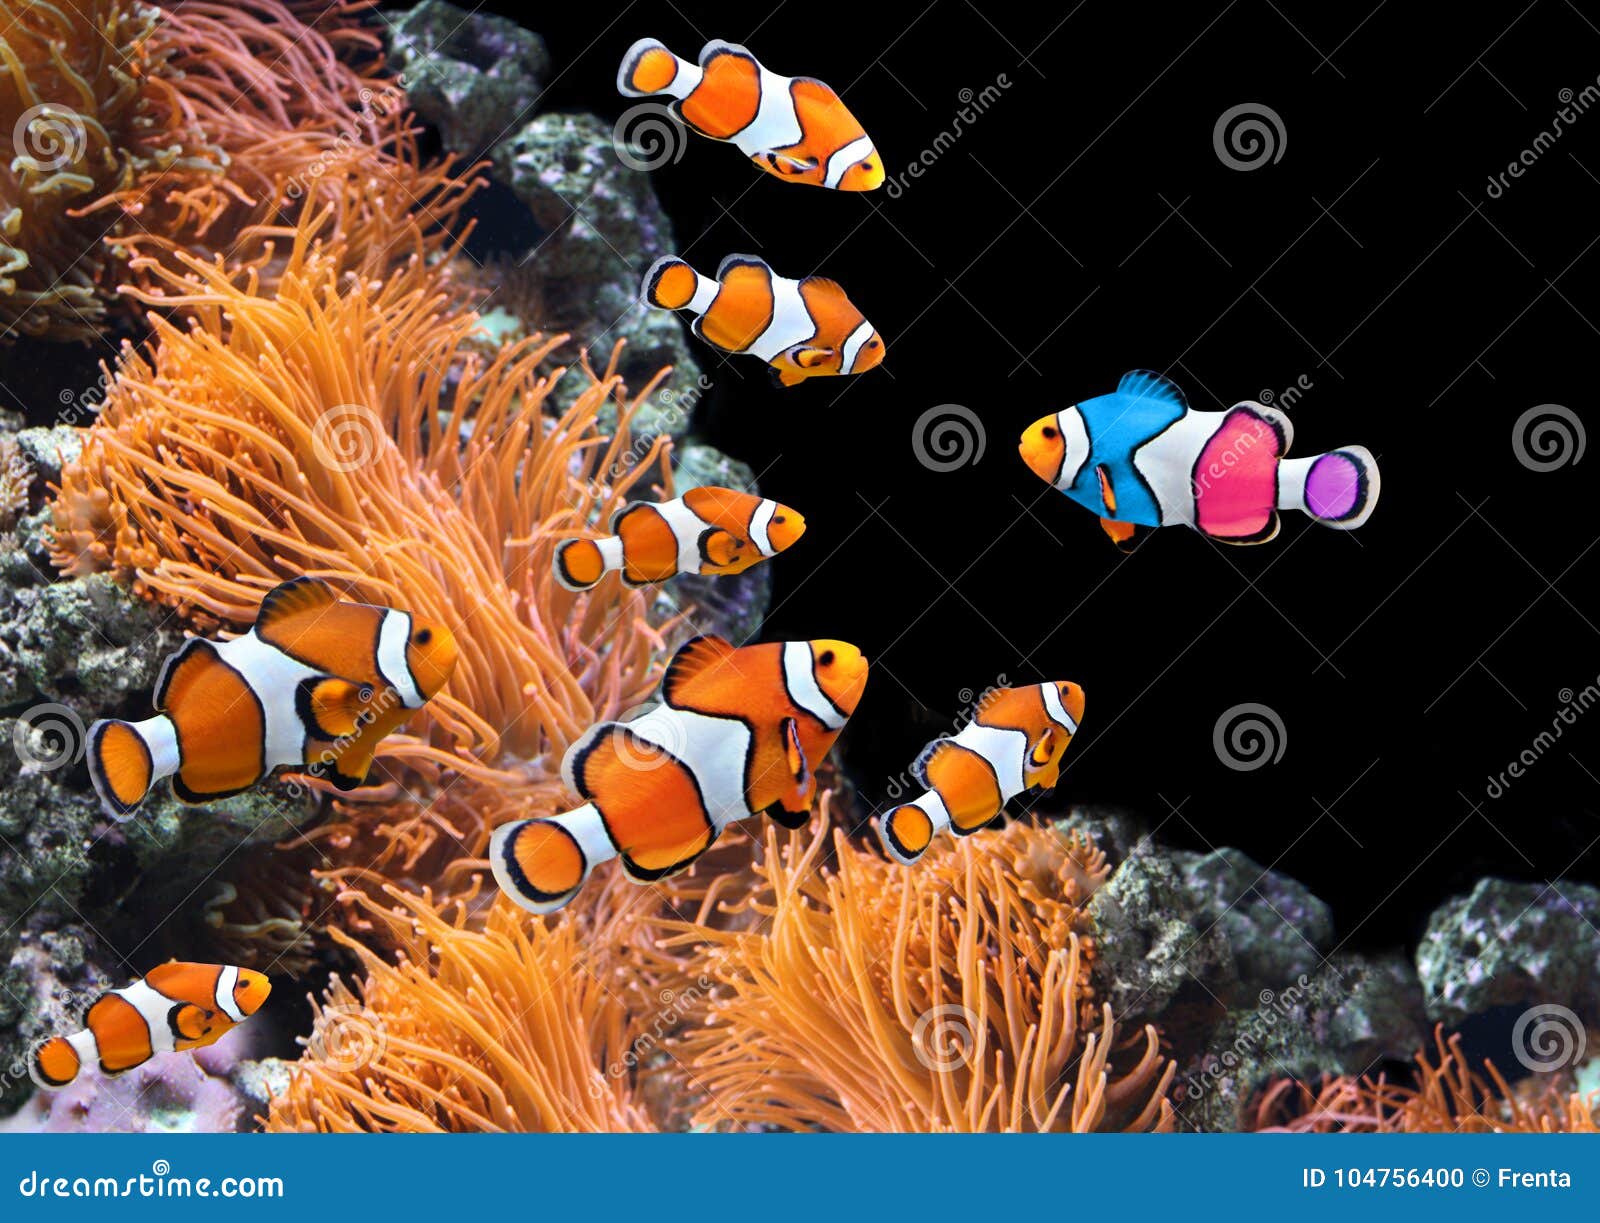 Flock of Standard Clownfish and One Colorful Fish Stock Photo